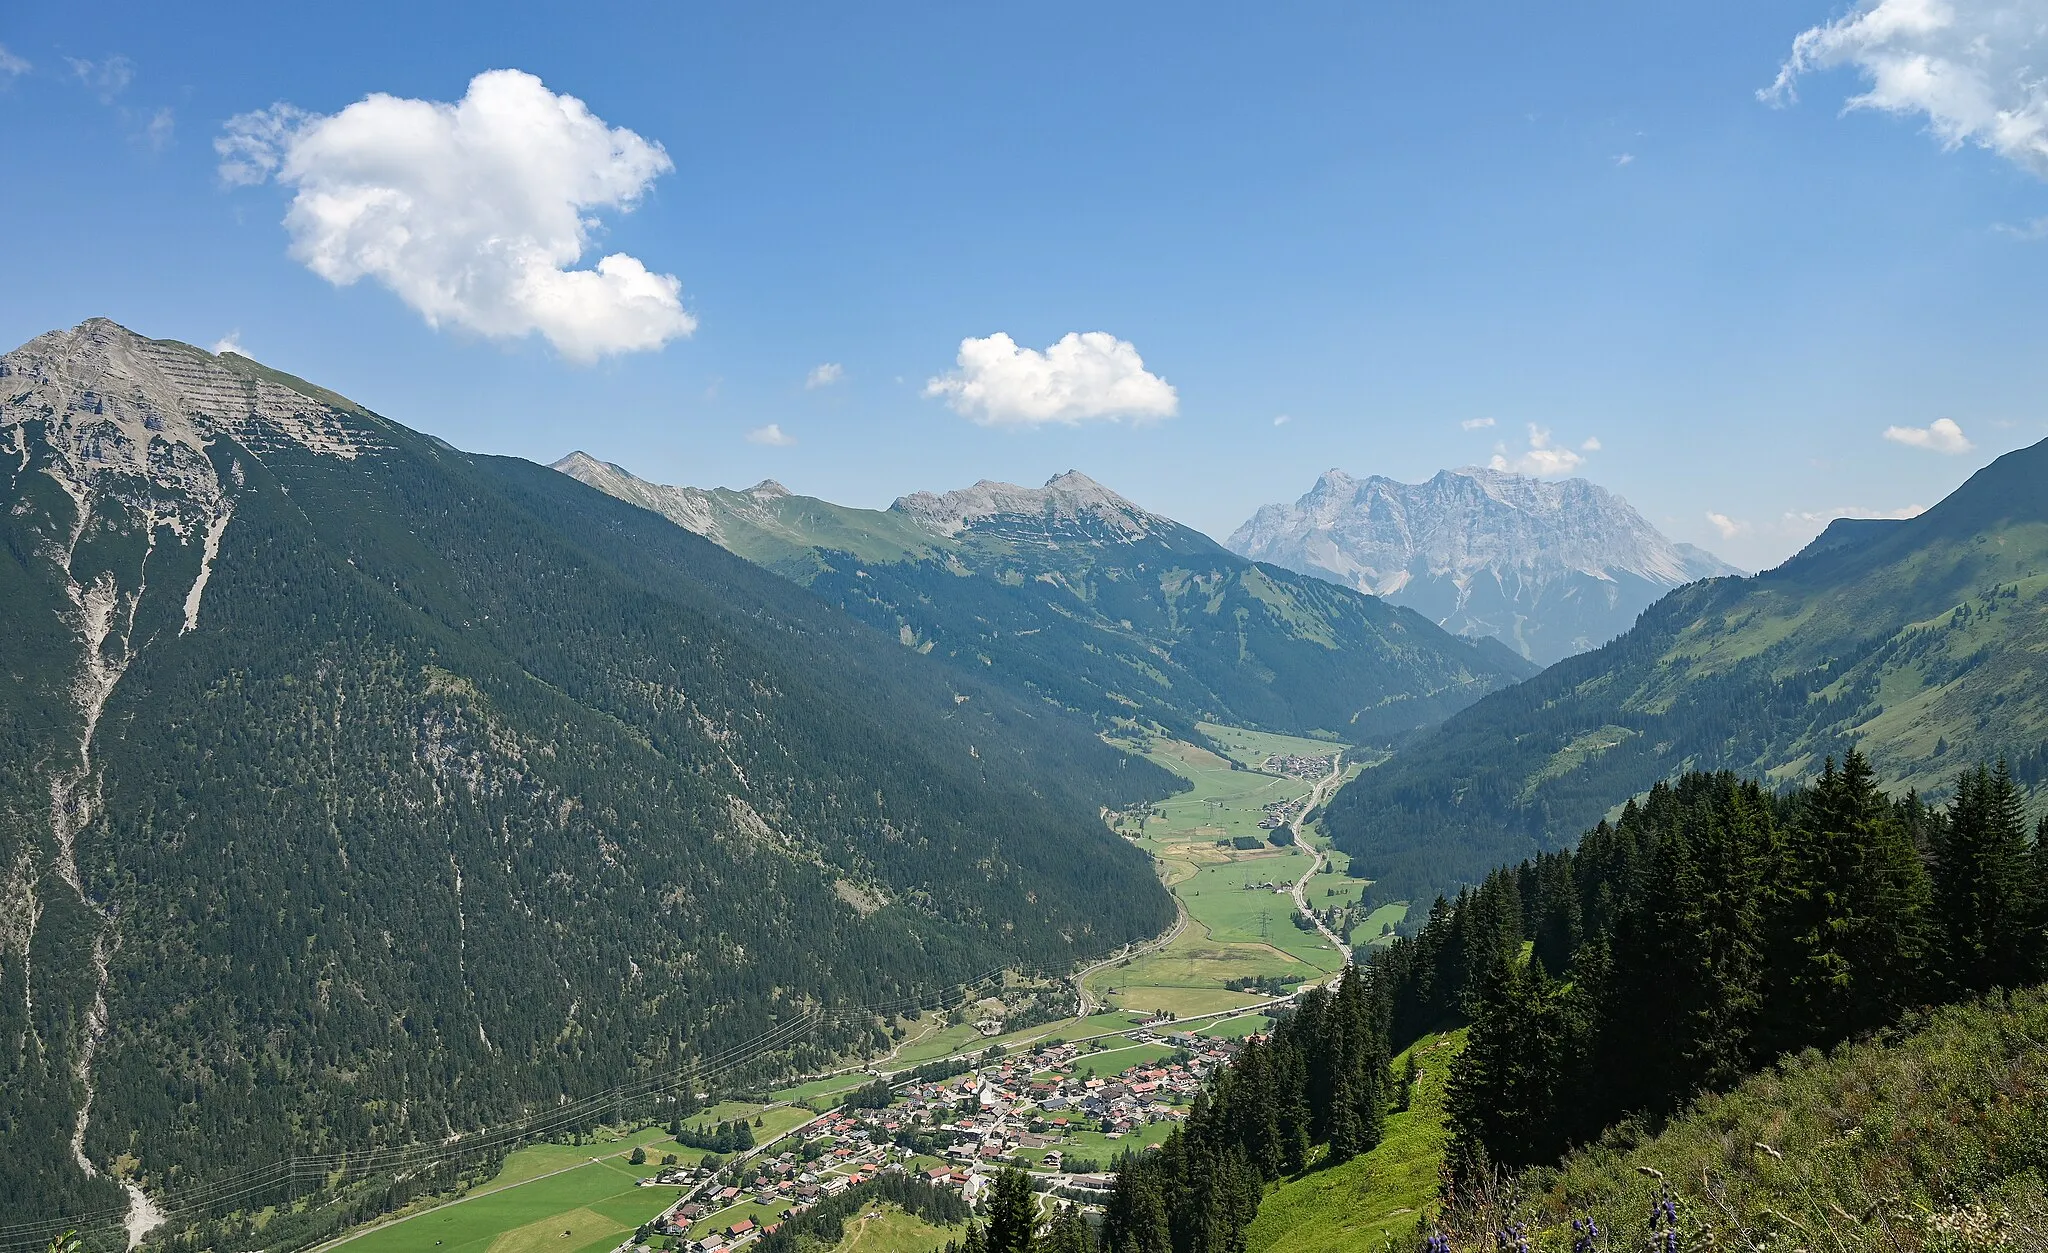 Photo showing: View from mountain Almkopf (1802m) over Kohlbergspitze, Daniel with Upsspitze and Zugspitze, valley with Bichlbach and street of the Tyrol Alps Fernpasstraße